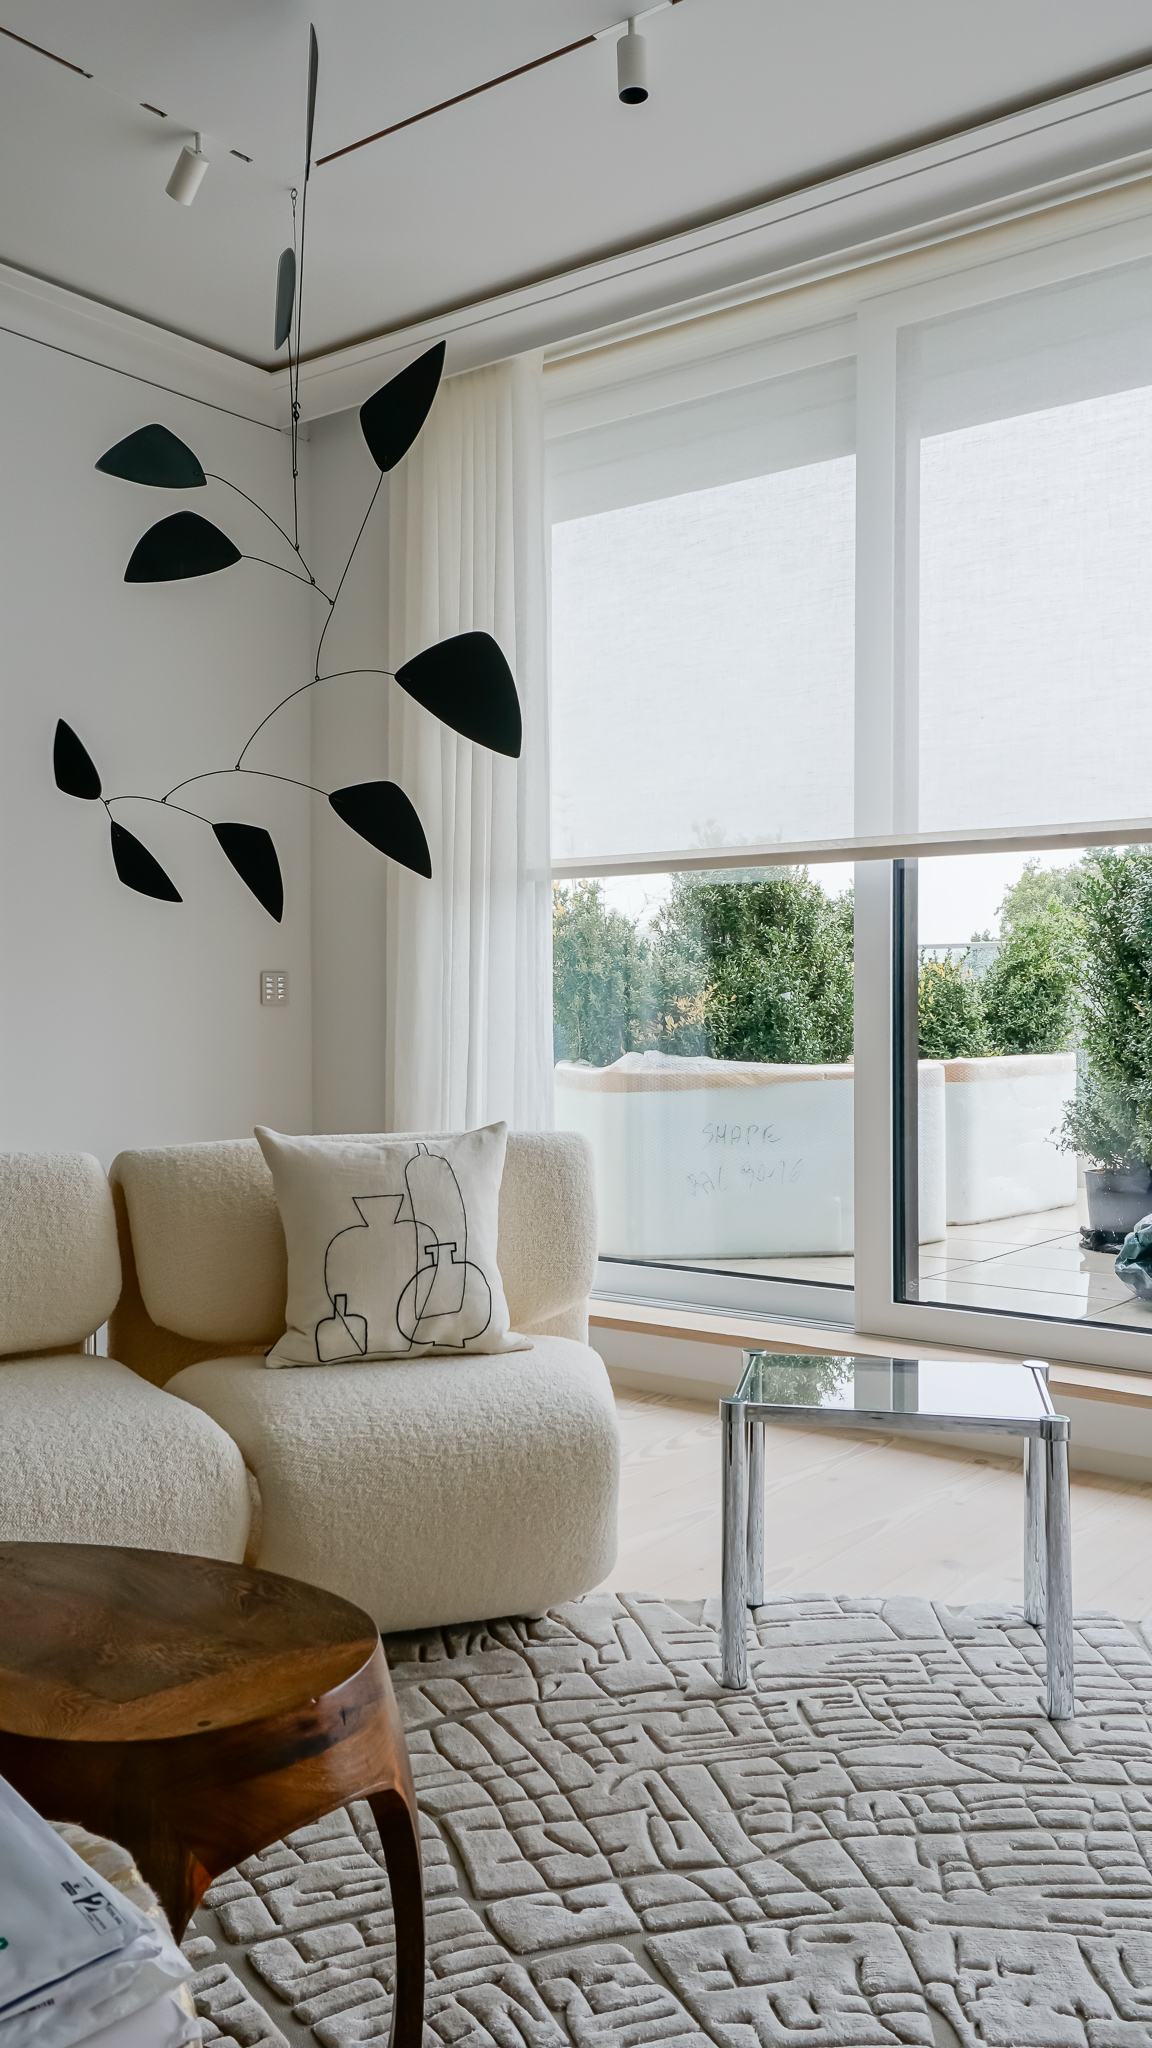 Decorative Living room sheers with roller blinds